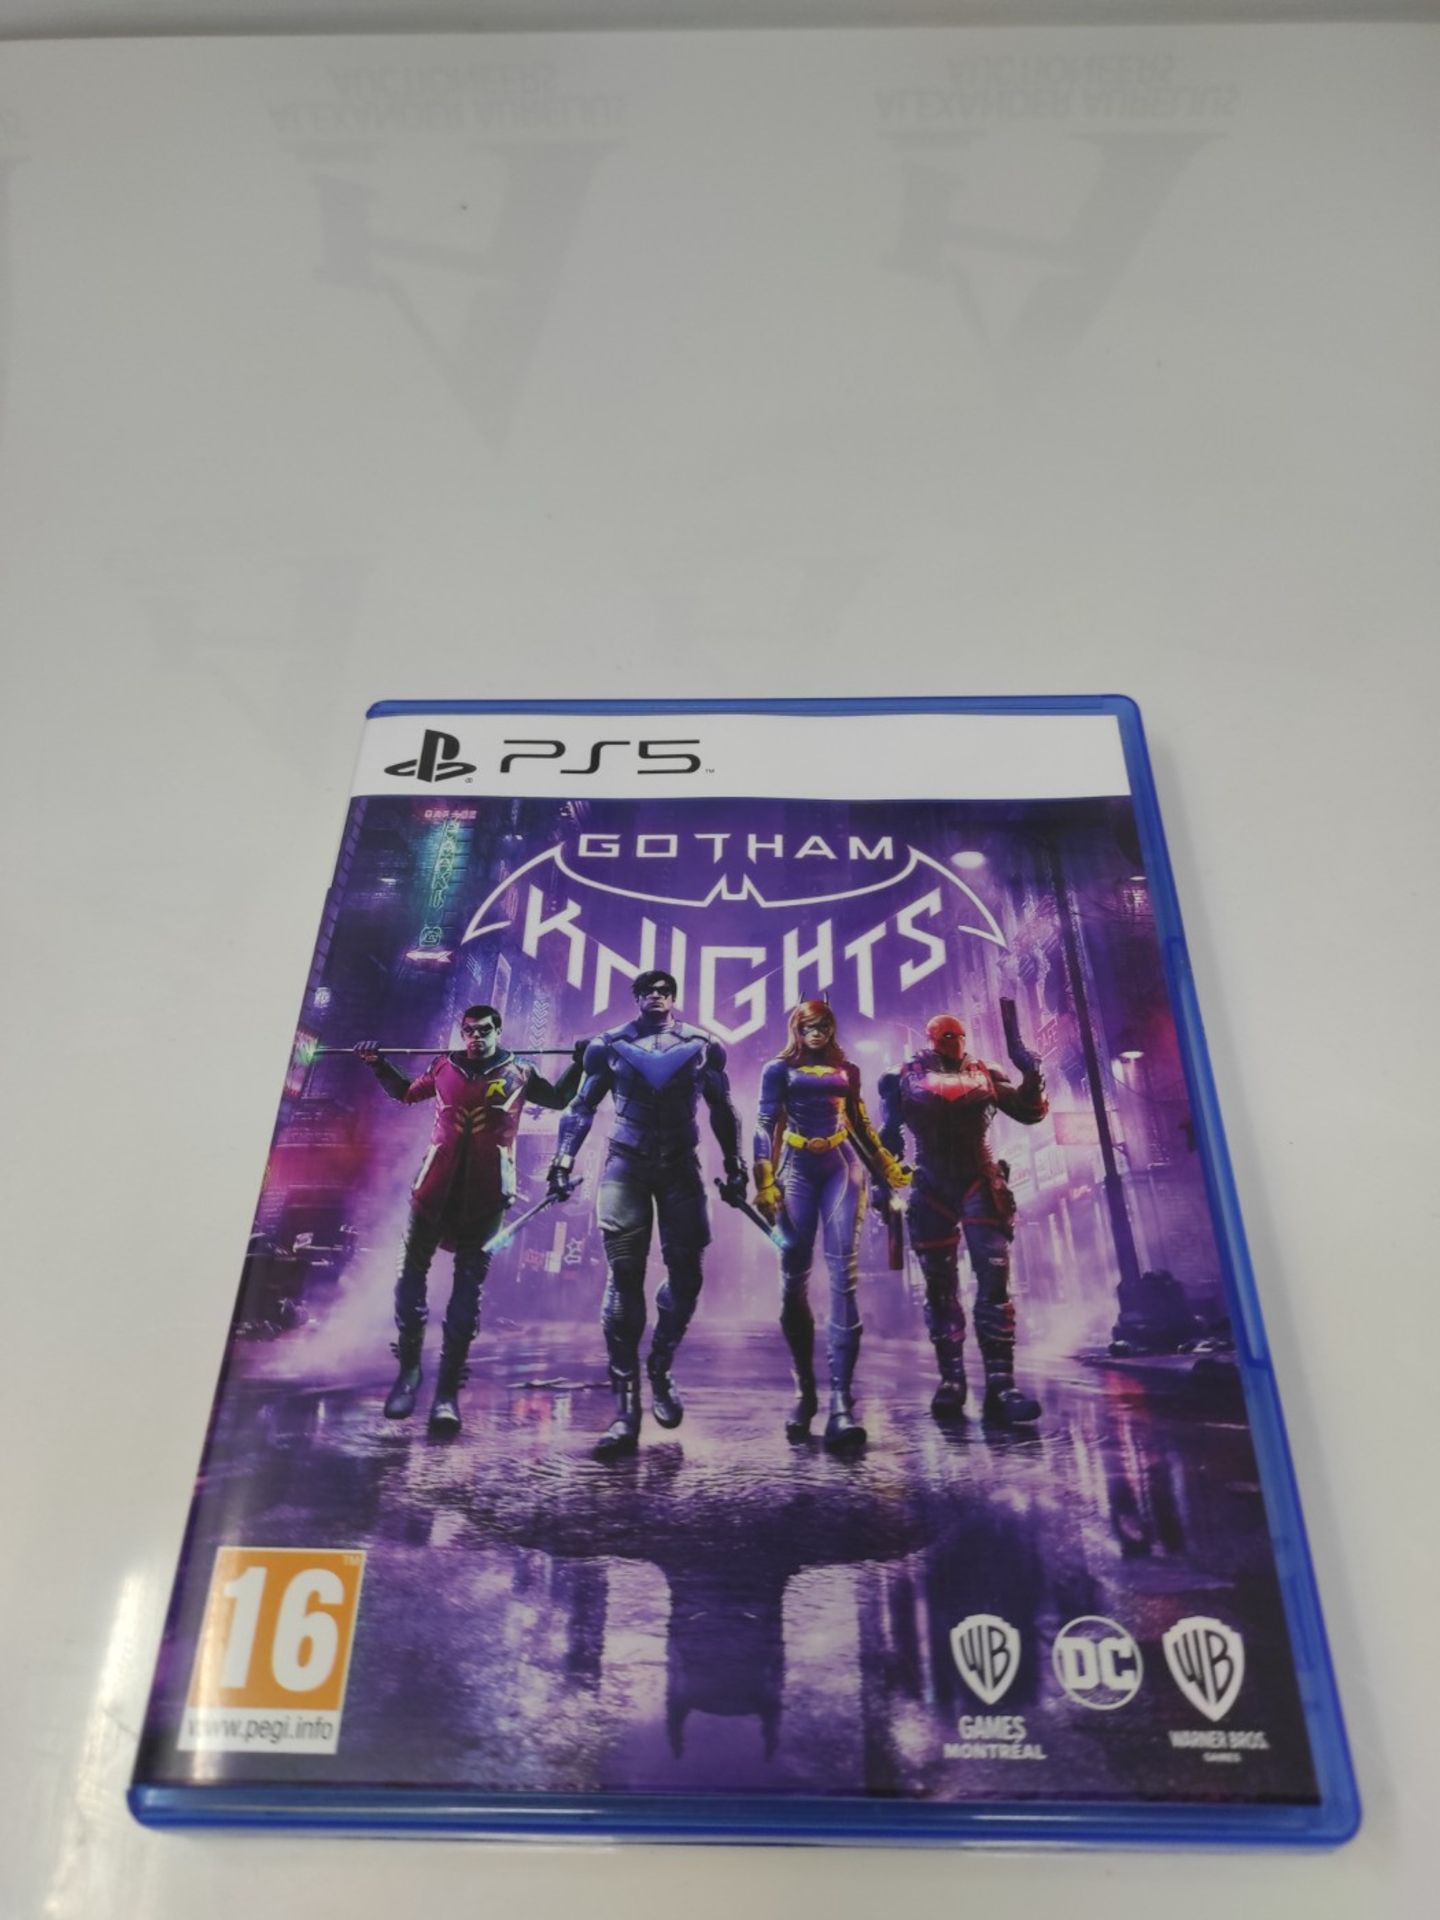 Gotham Knights is a video game available on the PlayStation 5. - Image 2 of 6